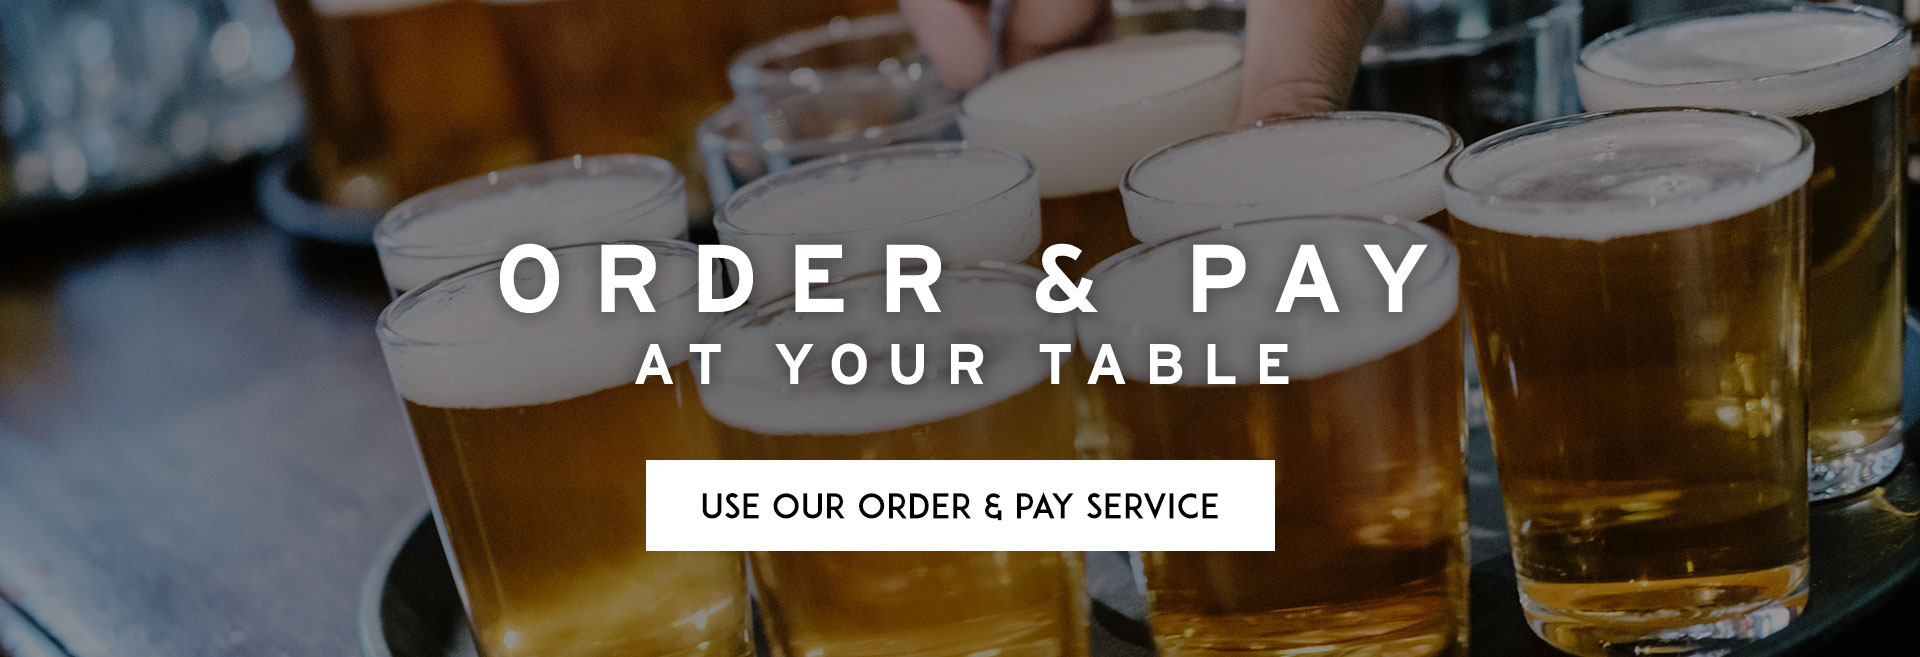 Order at table at The Old White Lion hero